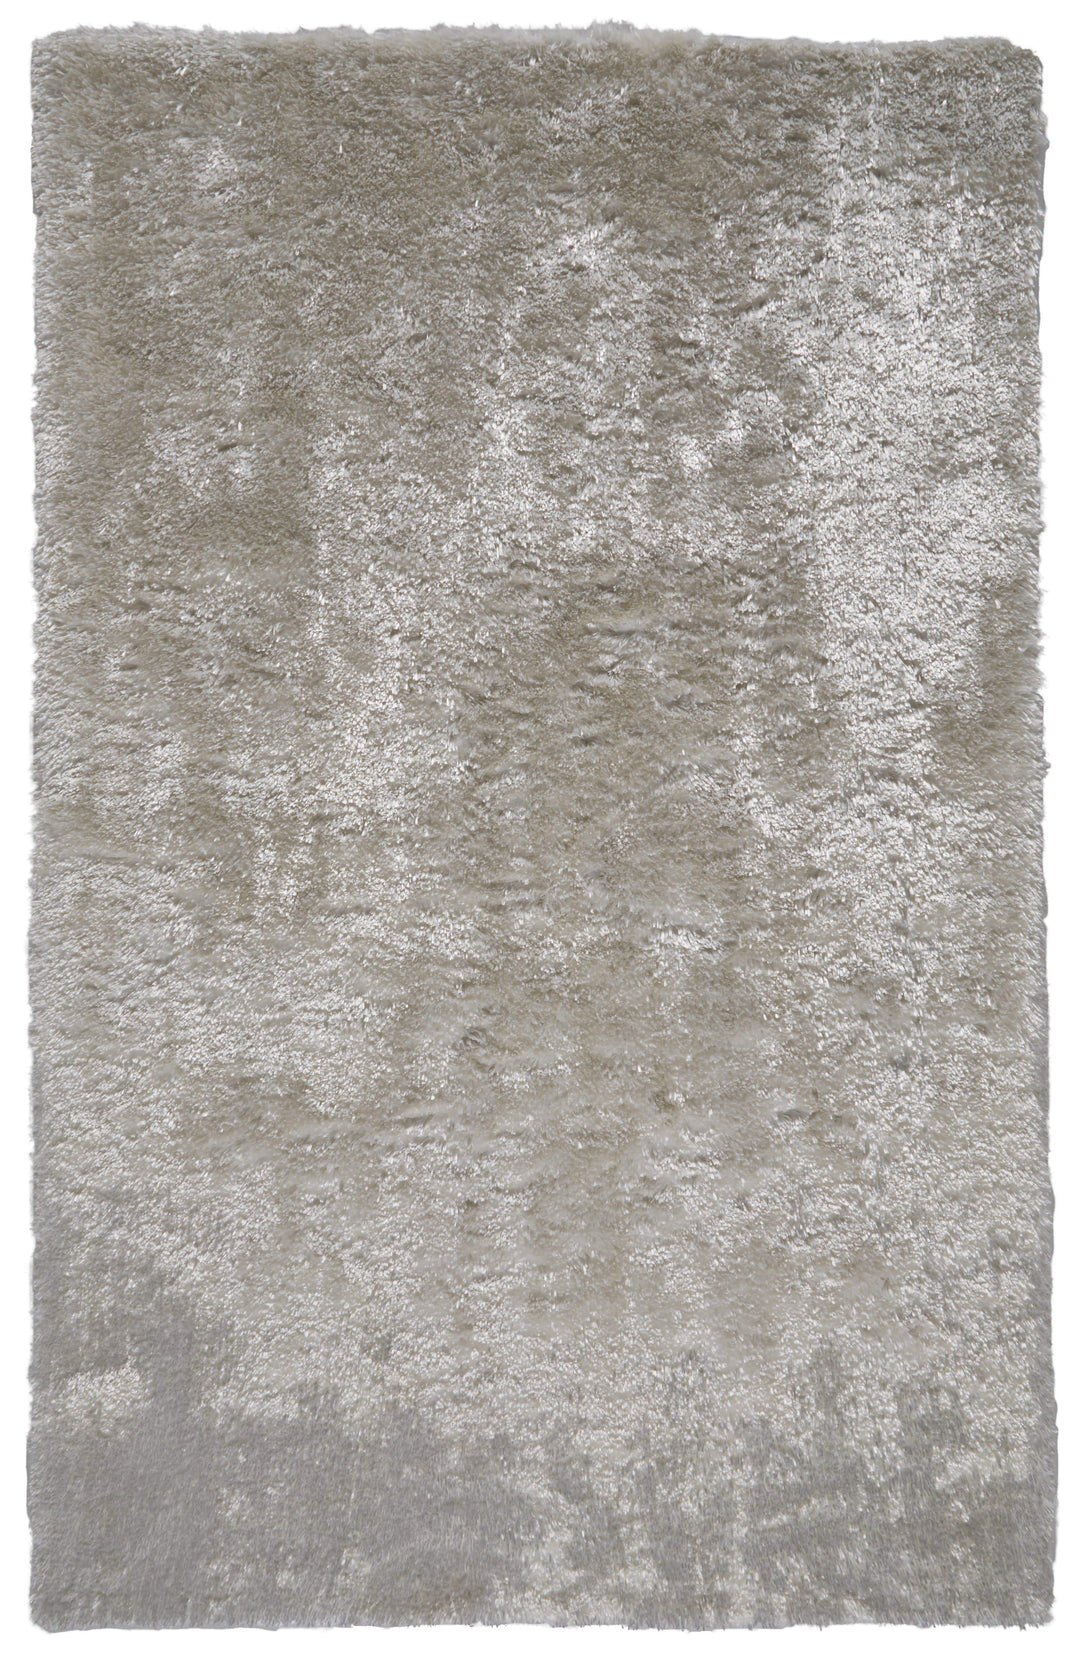 Feizy Feizy Blunham Luxurious Tufted Shag Rug - Lustrous Pearl White - Available in 5 Sizes 5' x 8' 7494116FWHT000E10